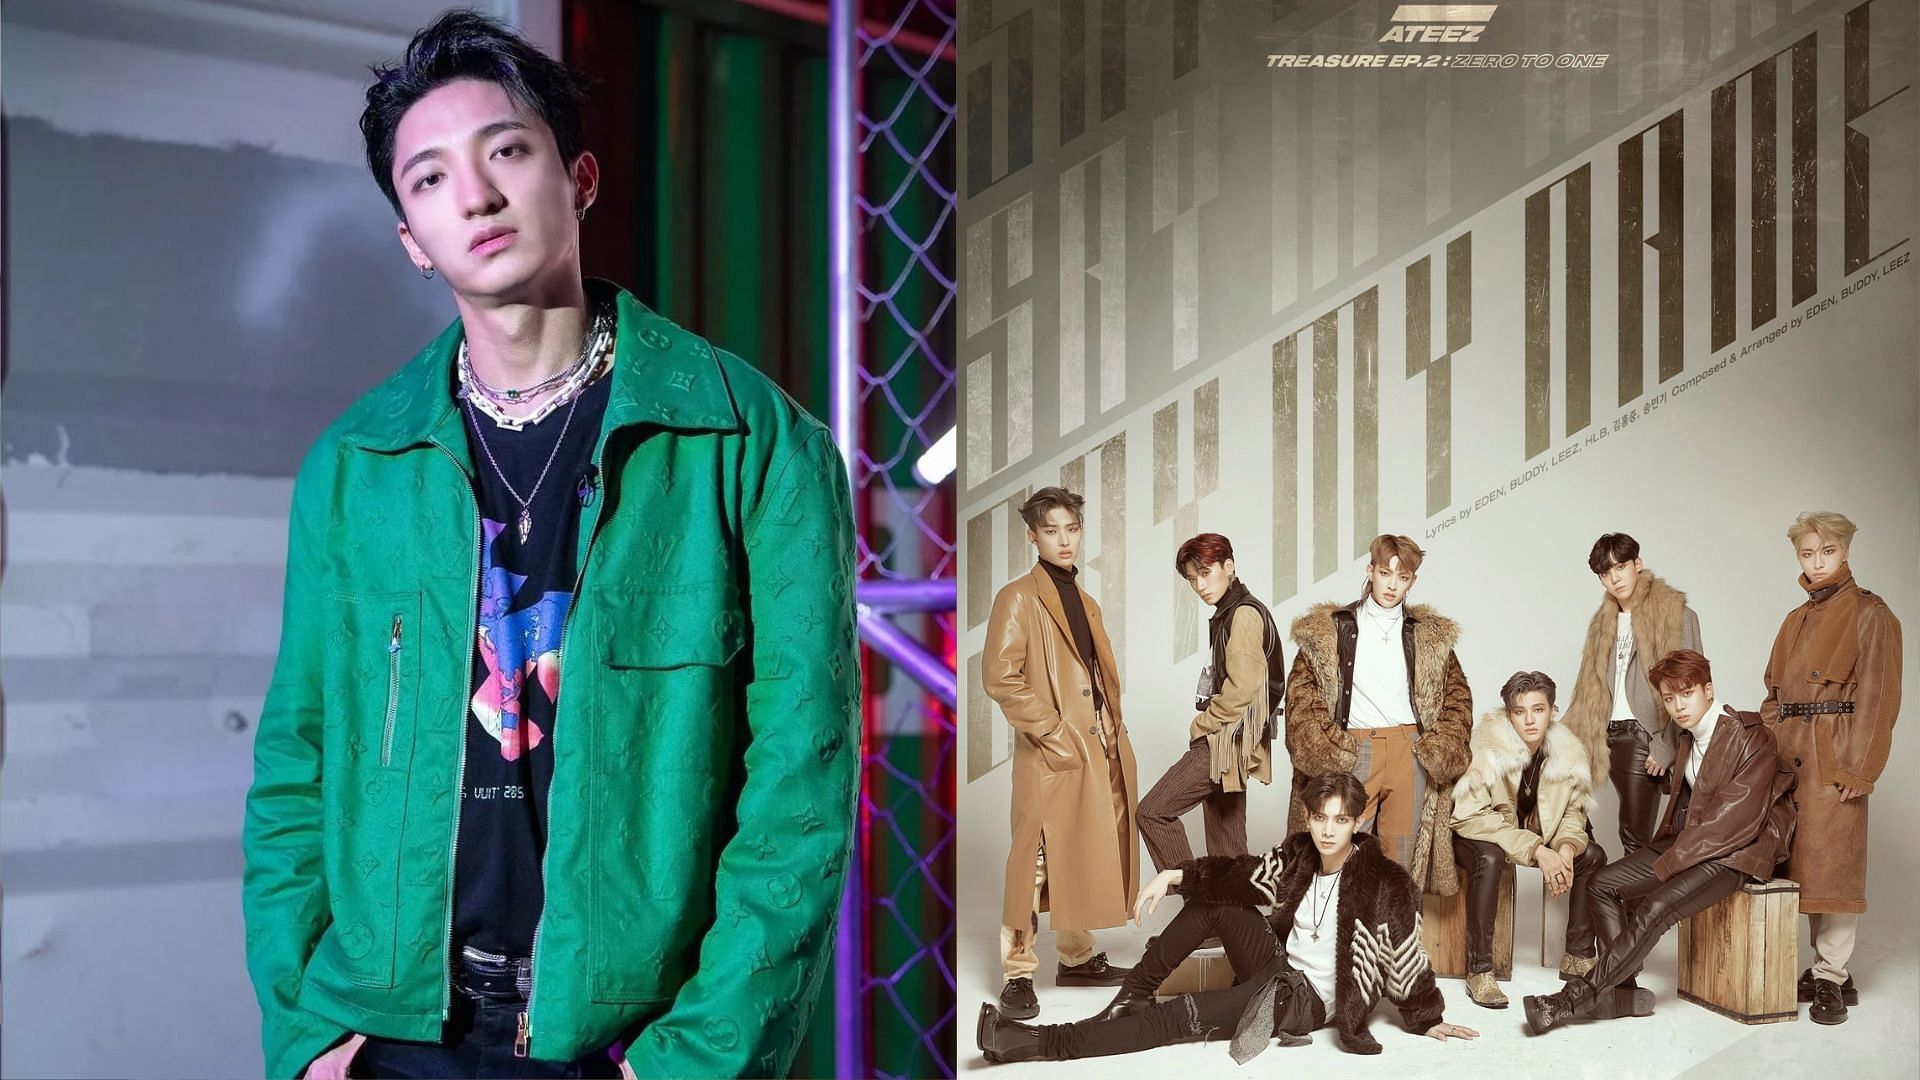 New Thing challenge creator VATA speaks his stance on the Say My Name plagiarism allegations (Images via Mnet and Twitter/ATEEZofficial)